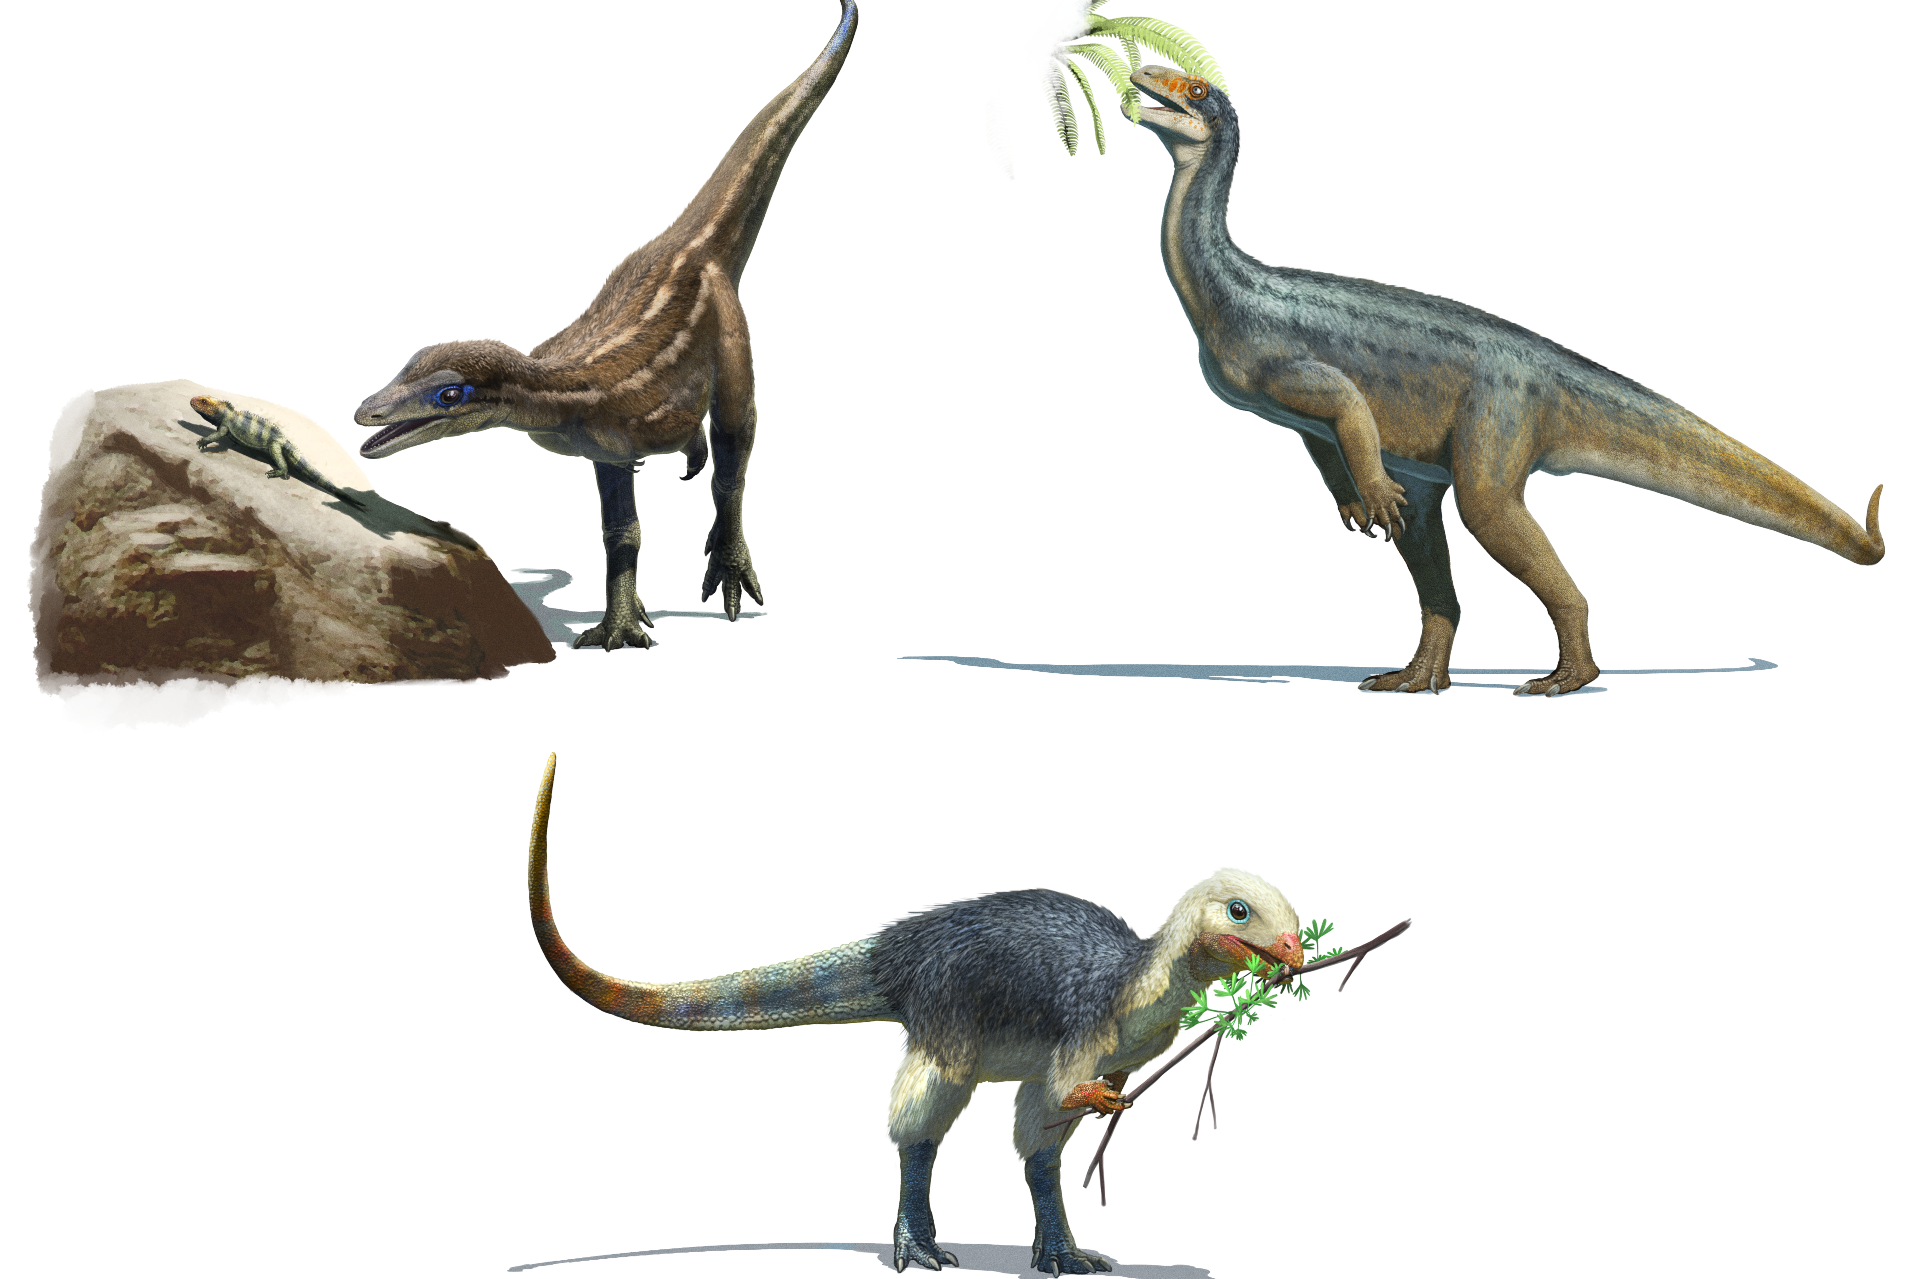 Thier diet,  Lesothosaurus is an omnivore, Buriolestes is a carnivore and Thecodontosaurus is an herbivore